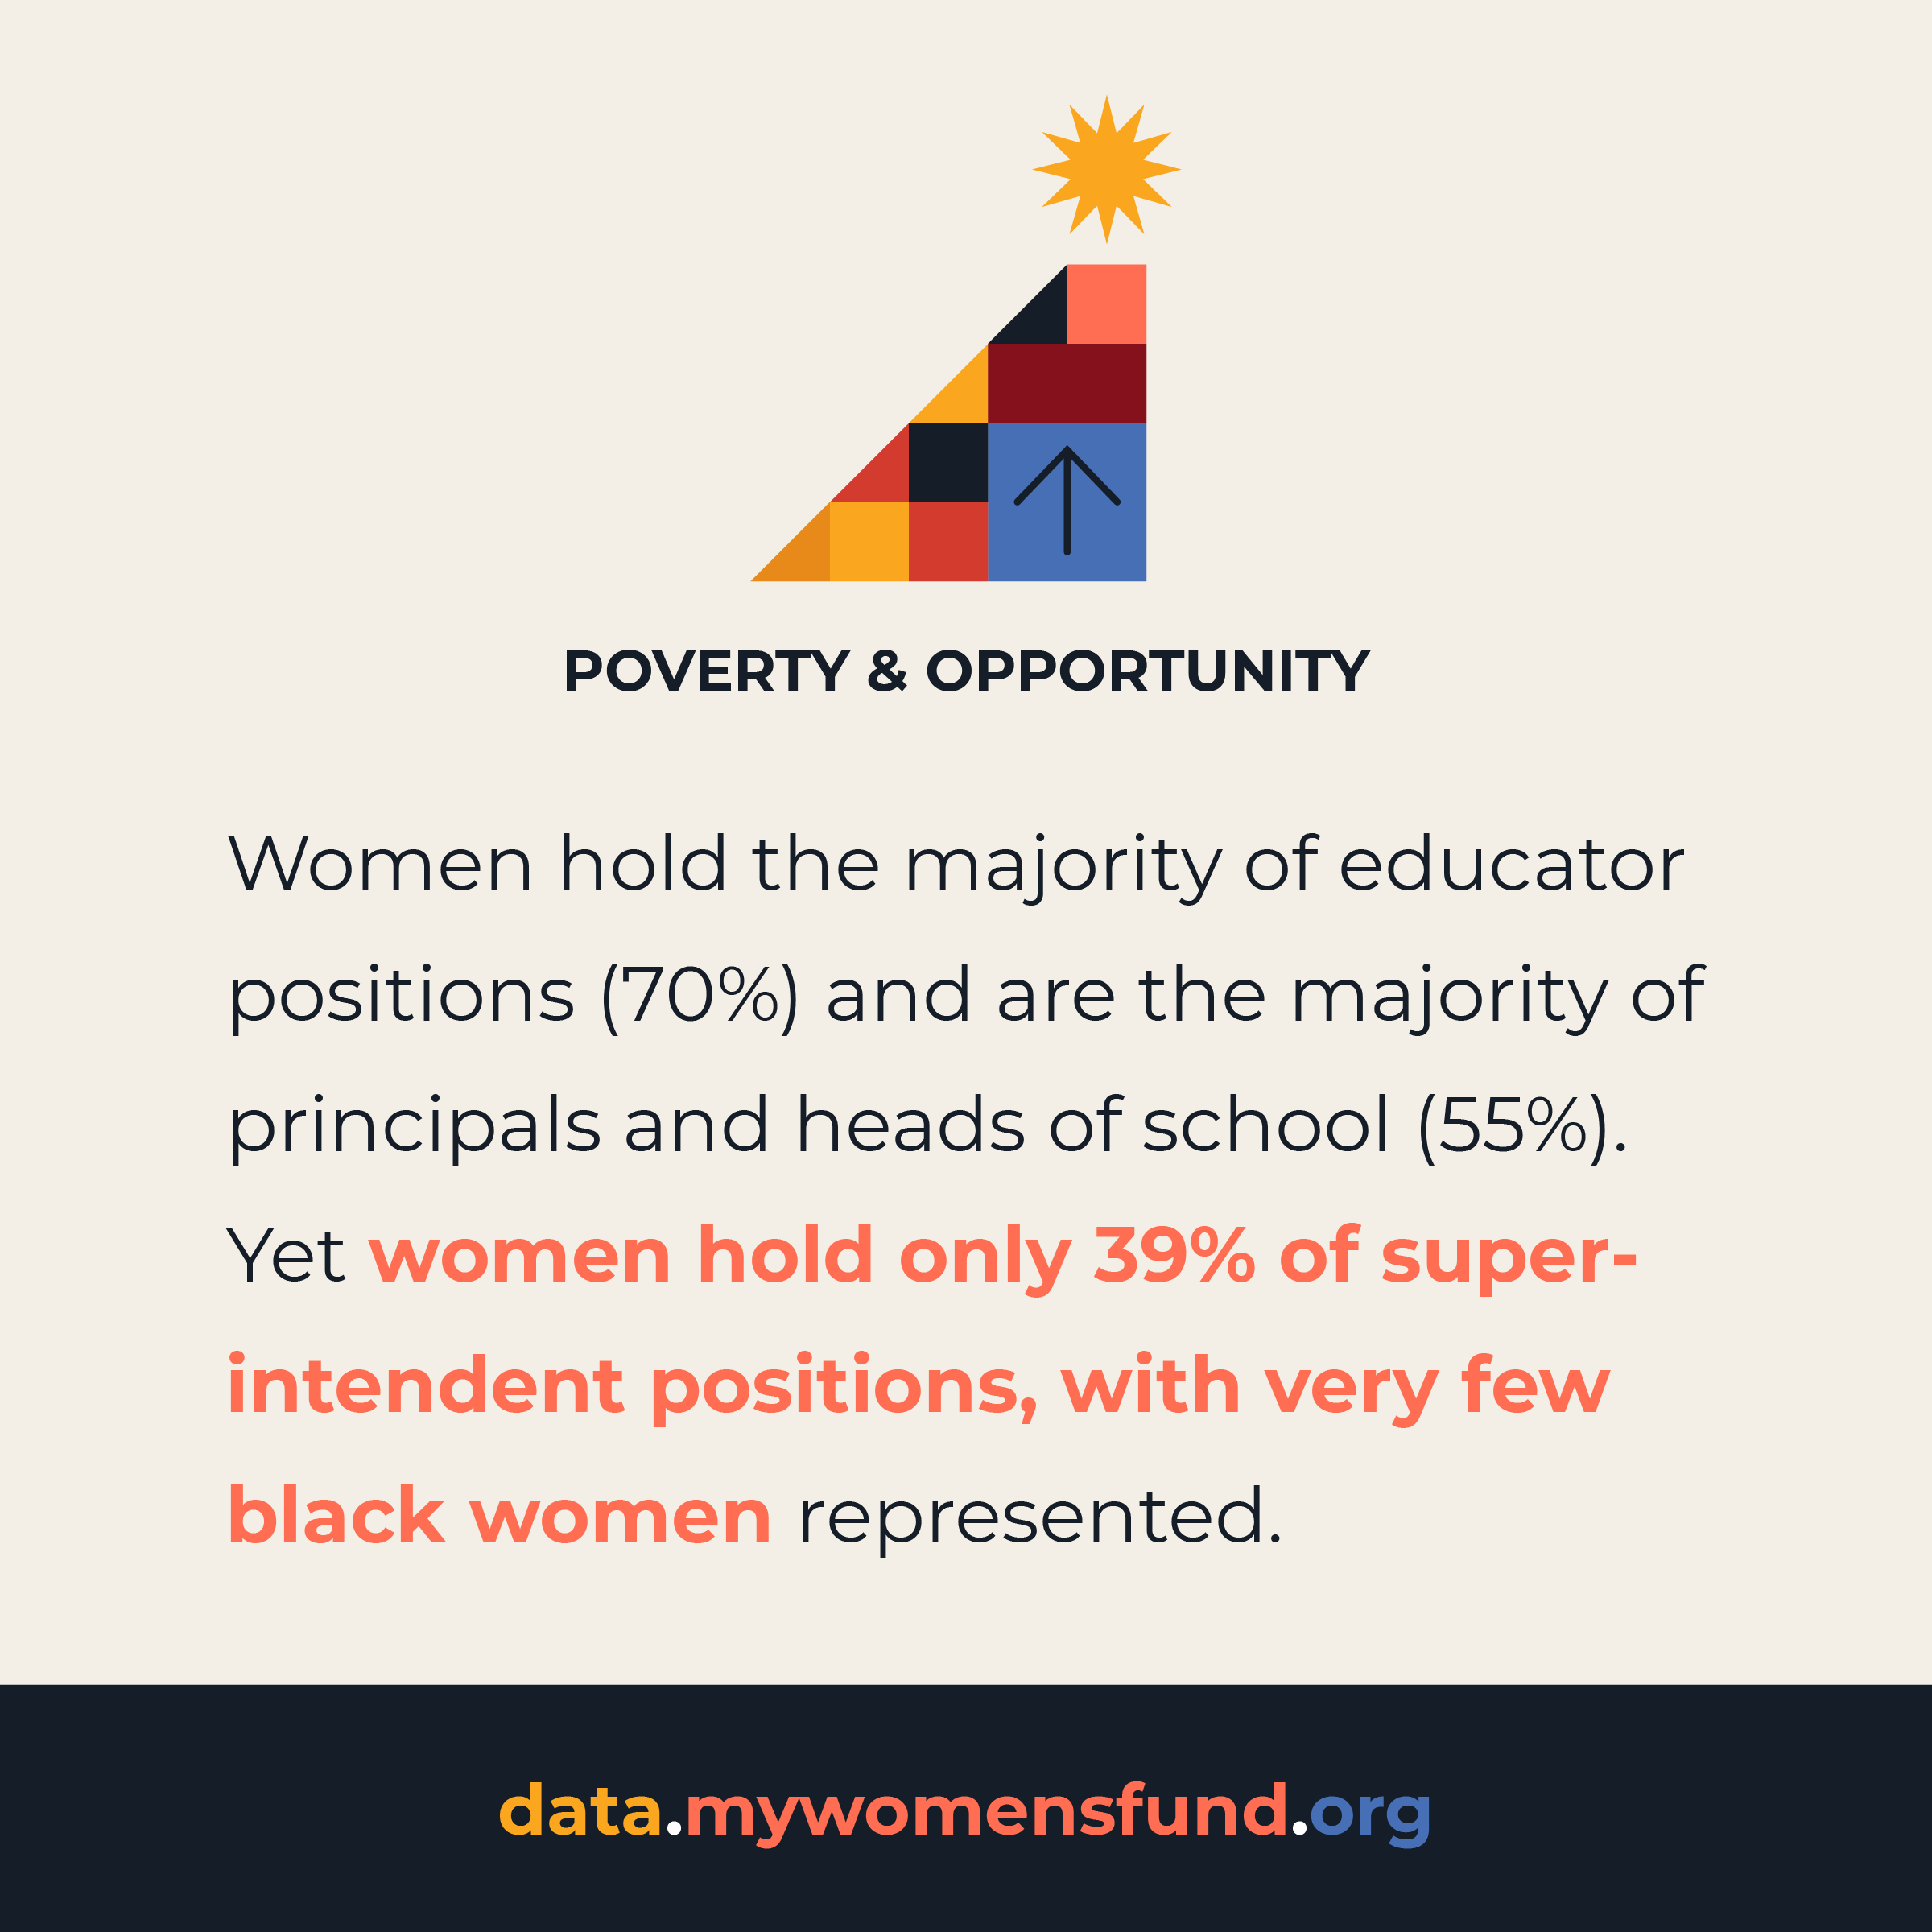 Poverty & Opportunity Data Point